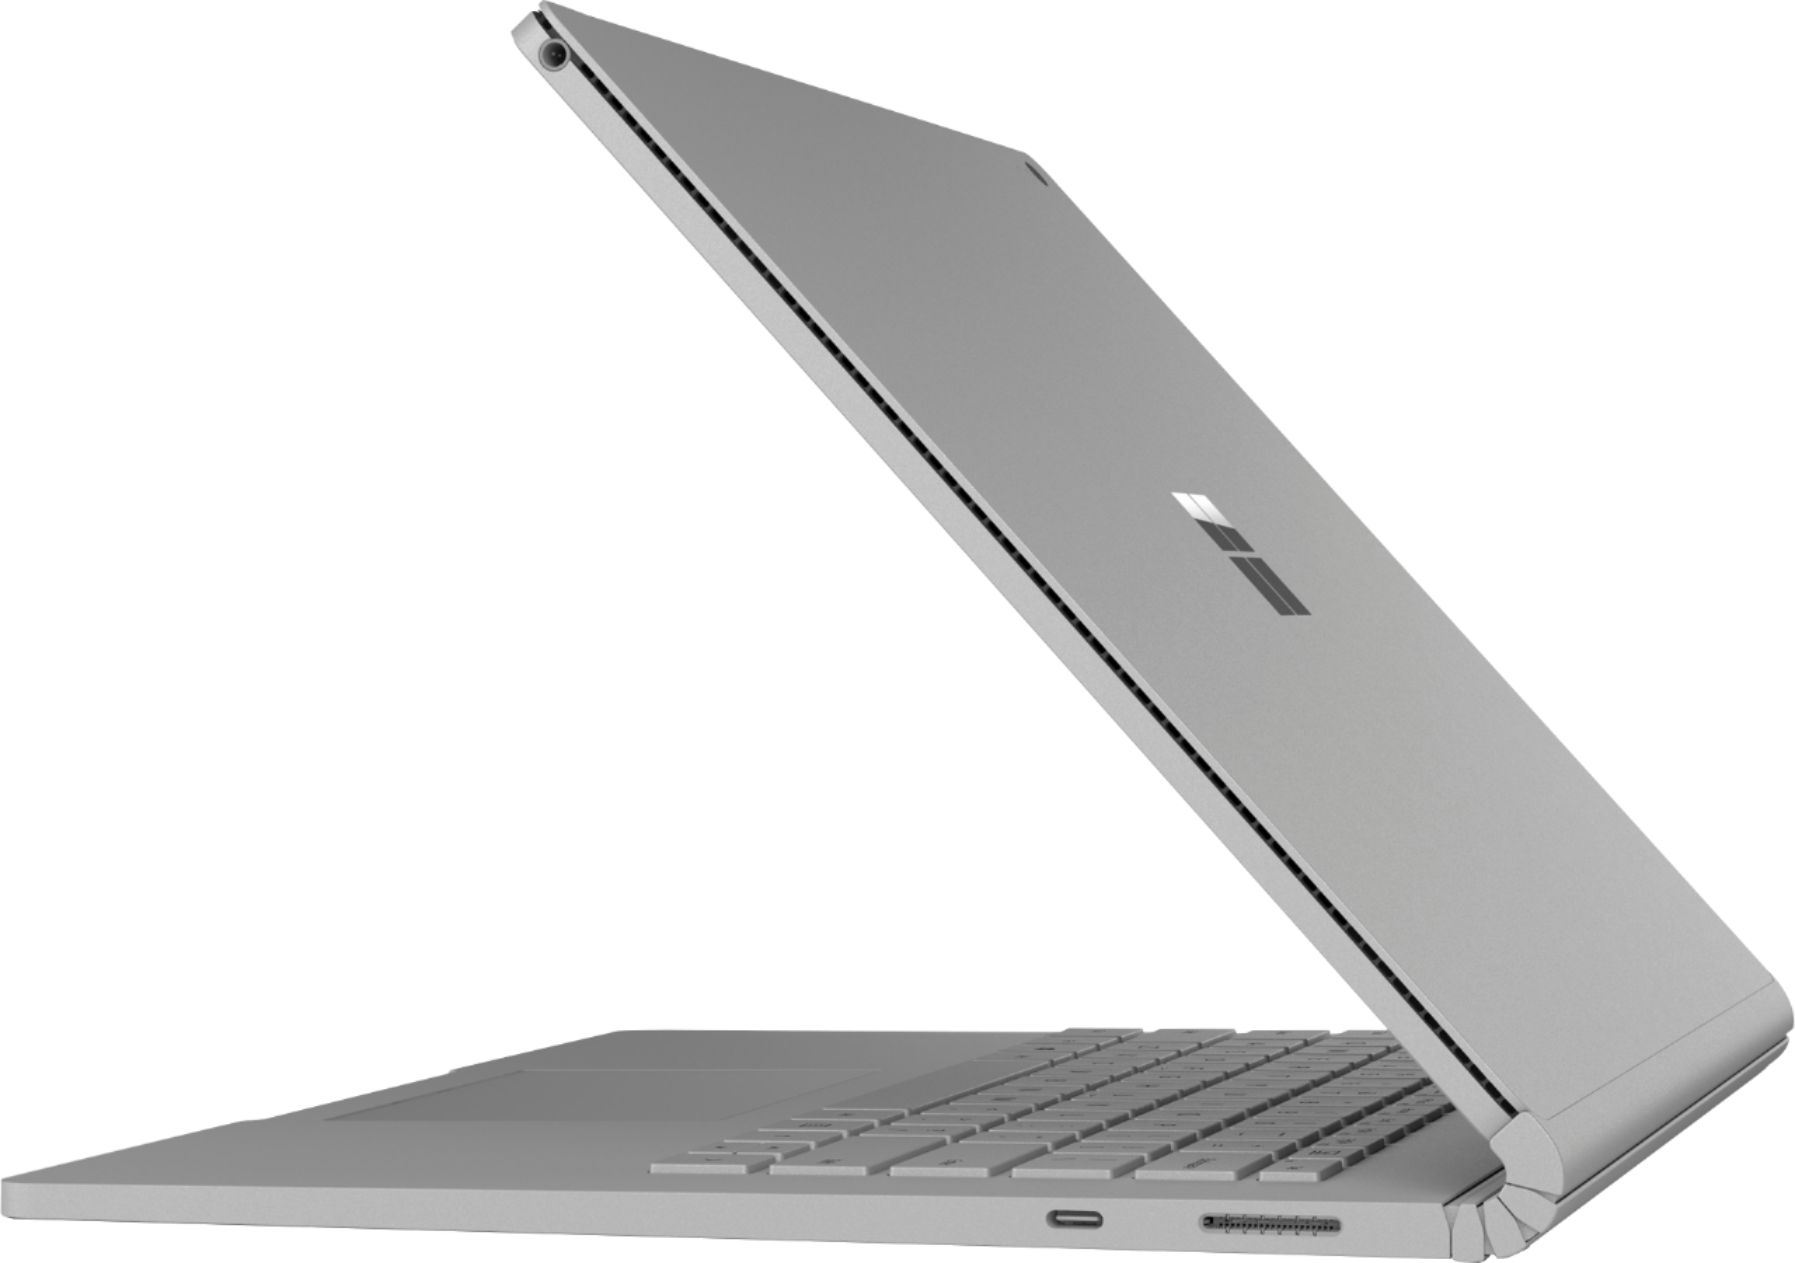 Left View: Microsoft - Geek Squad Certified Refurbished Surface Laptop 3 2-in-1 13.5" Touch-Screen - Intel Core i5 - 8GB Memory - 256GB SSD - Platinum